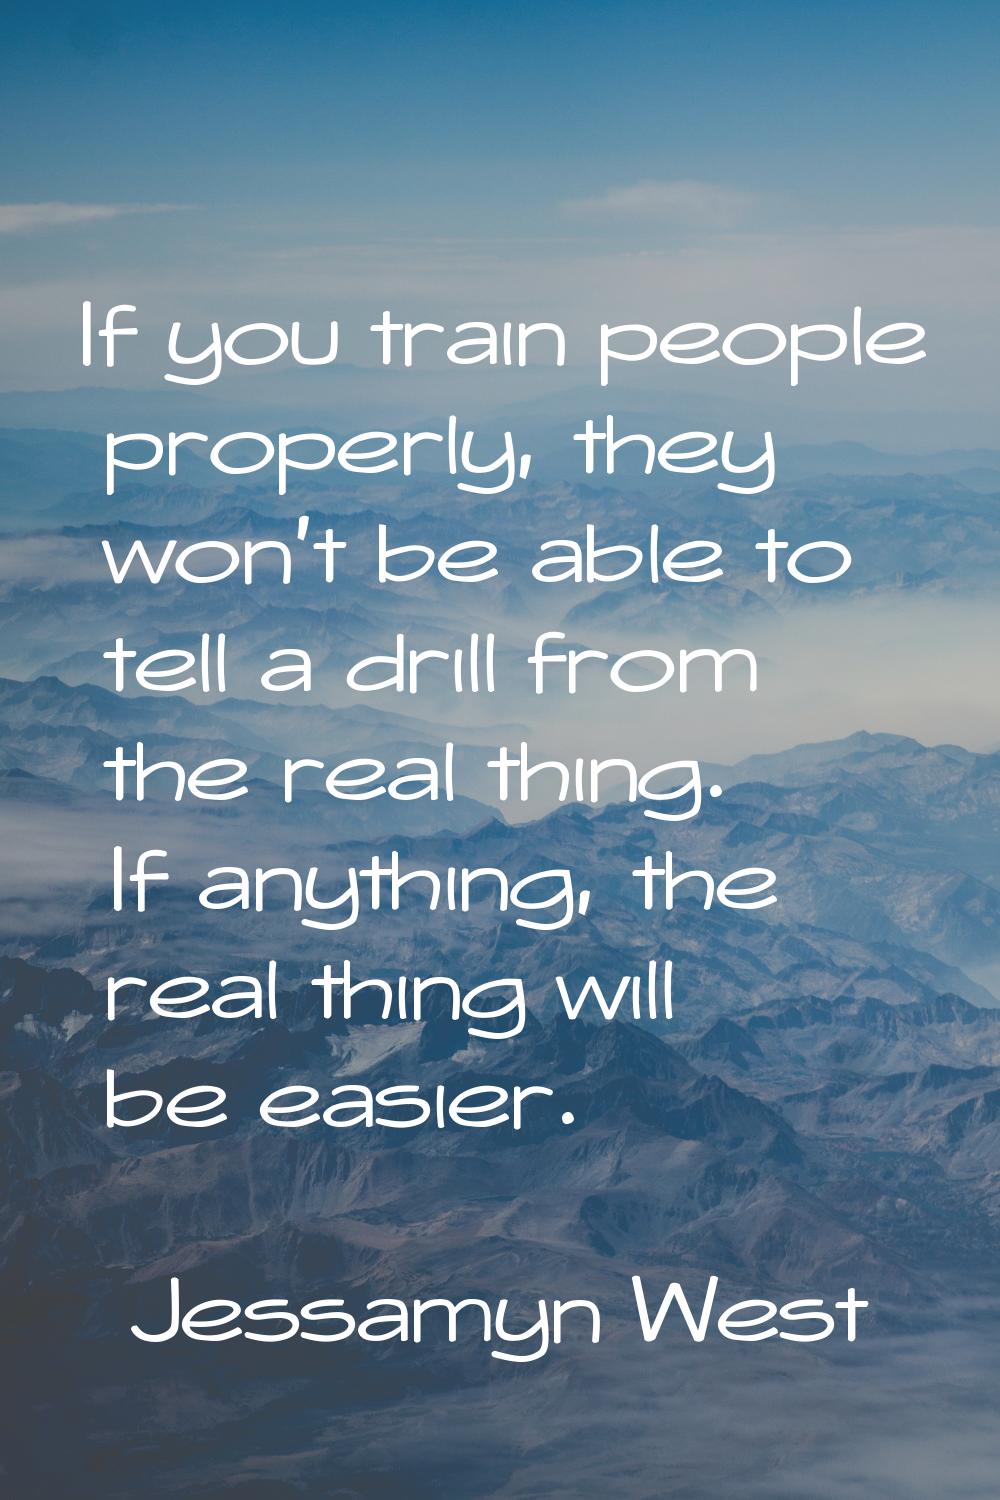 If you train people properly, they won't be able to tell a drill from the real thing. If anything, 